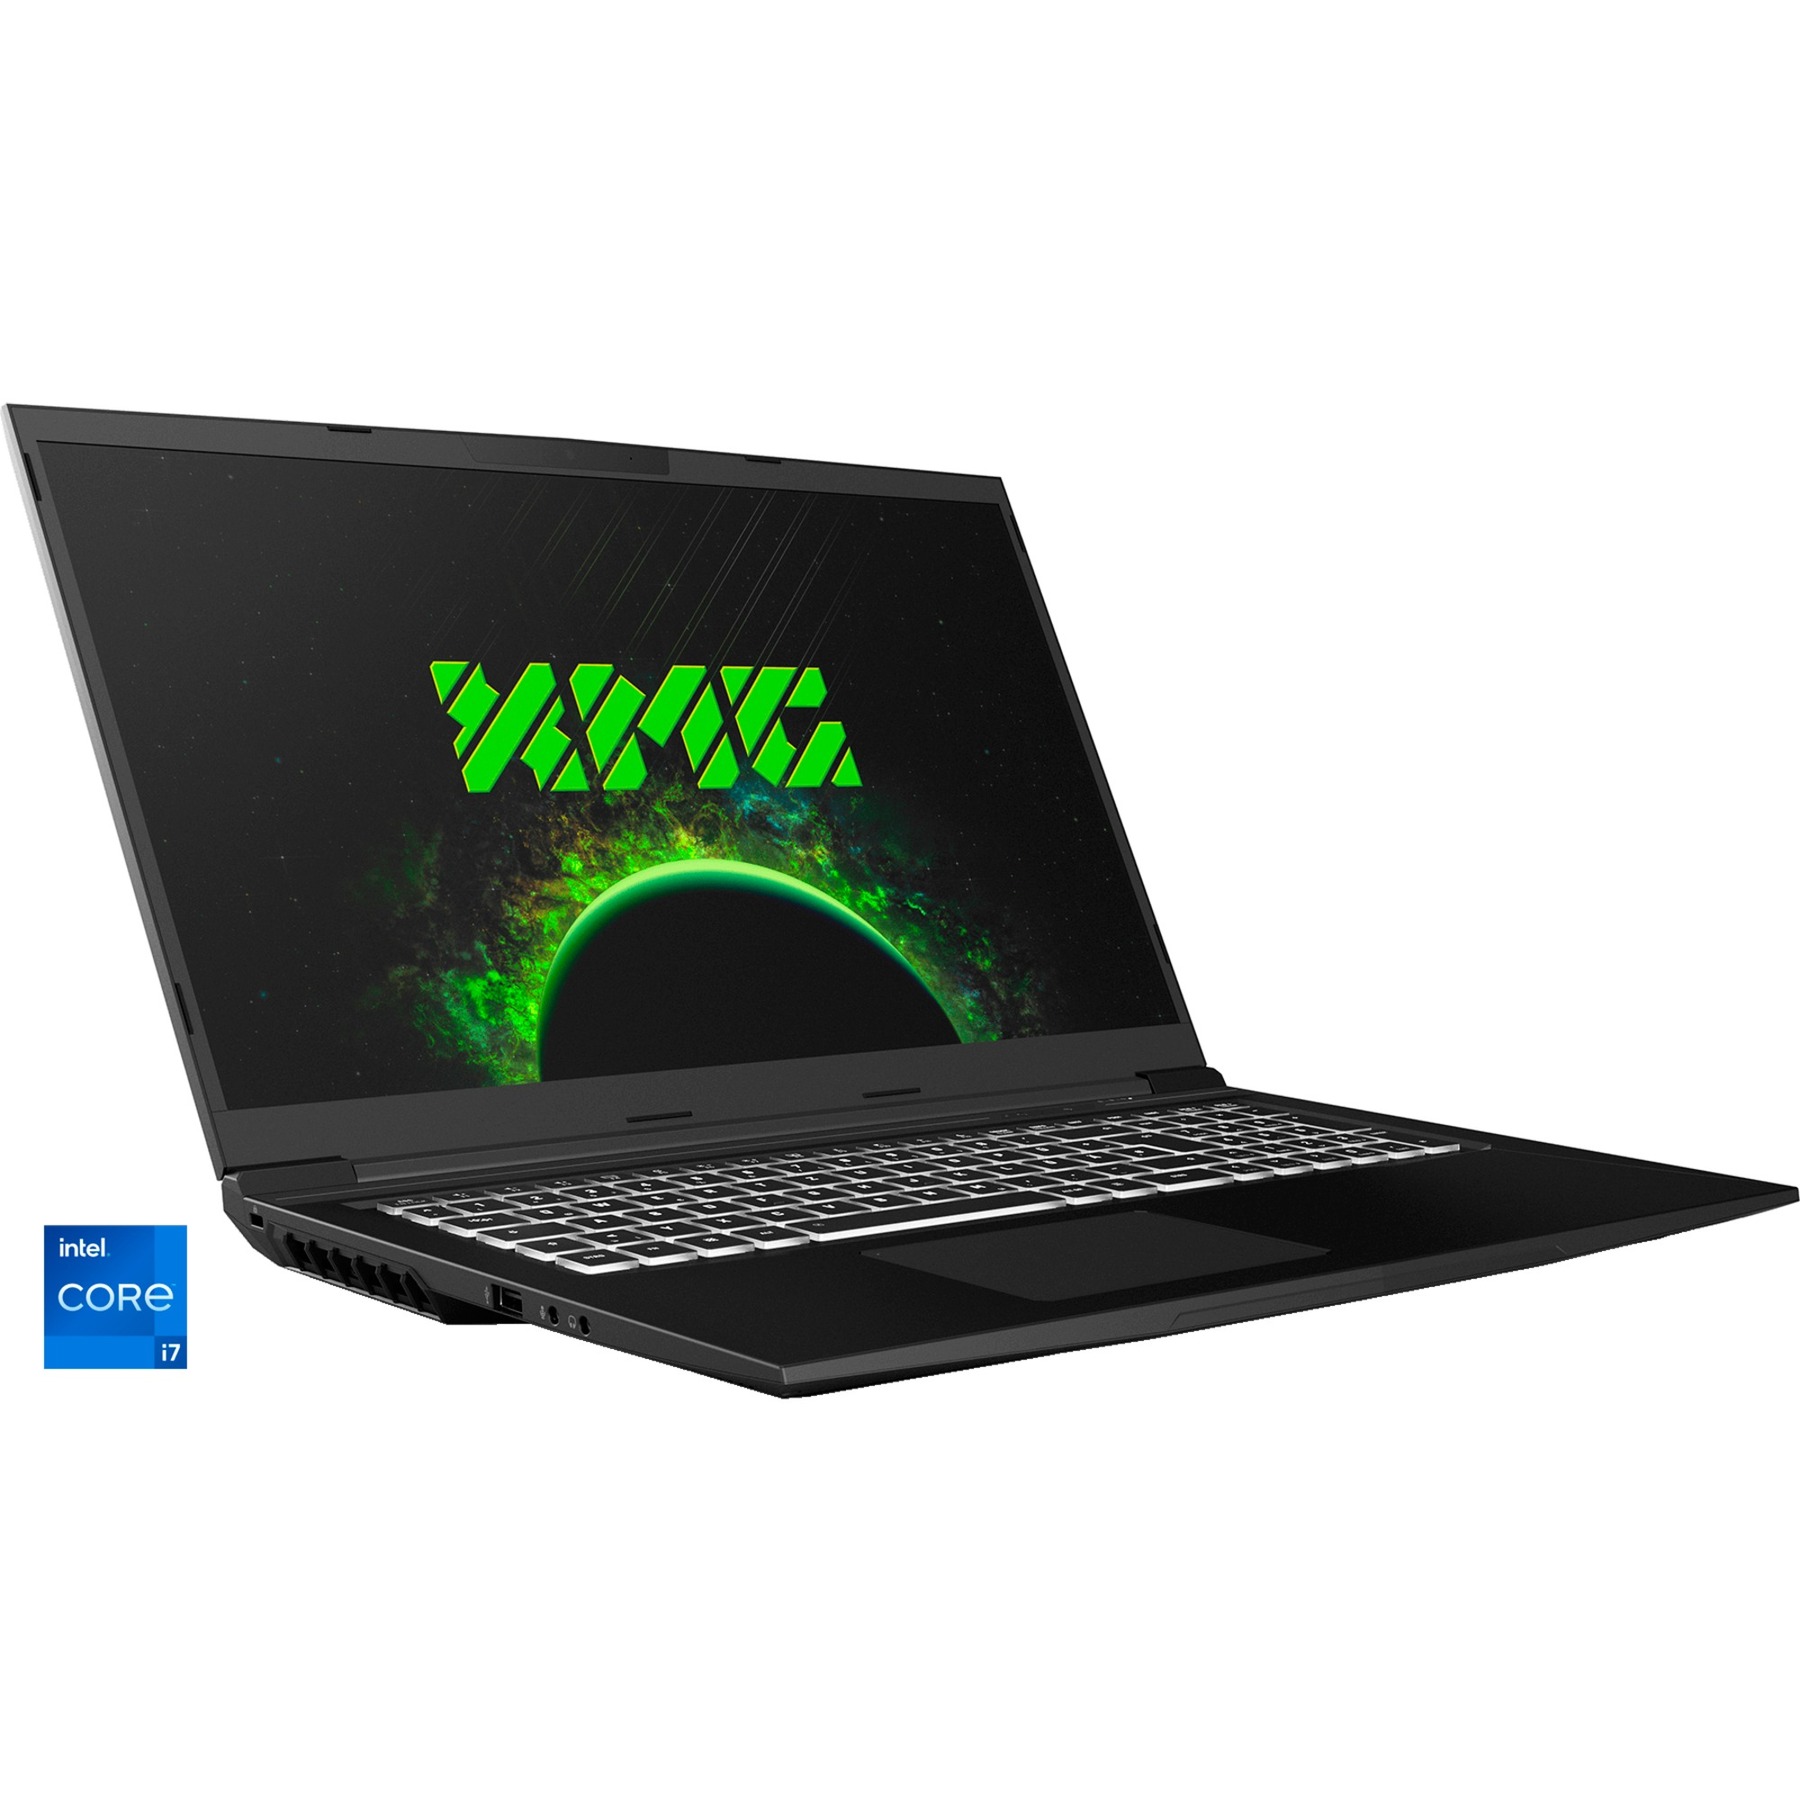 CORE 17 (10505857), Gaming-Notebook